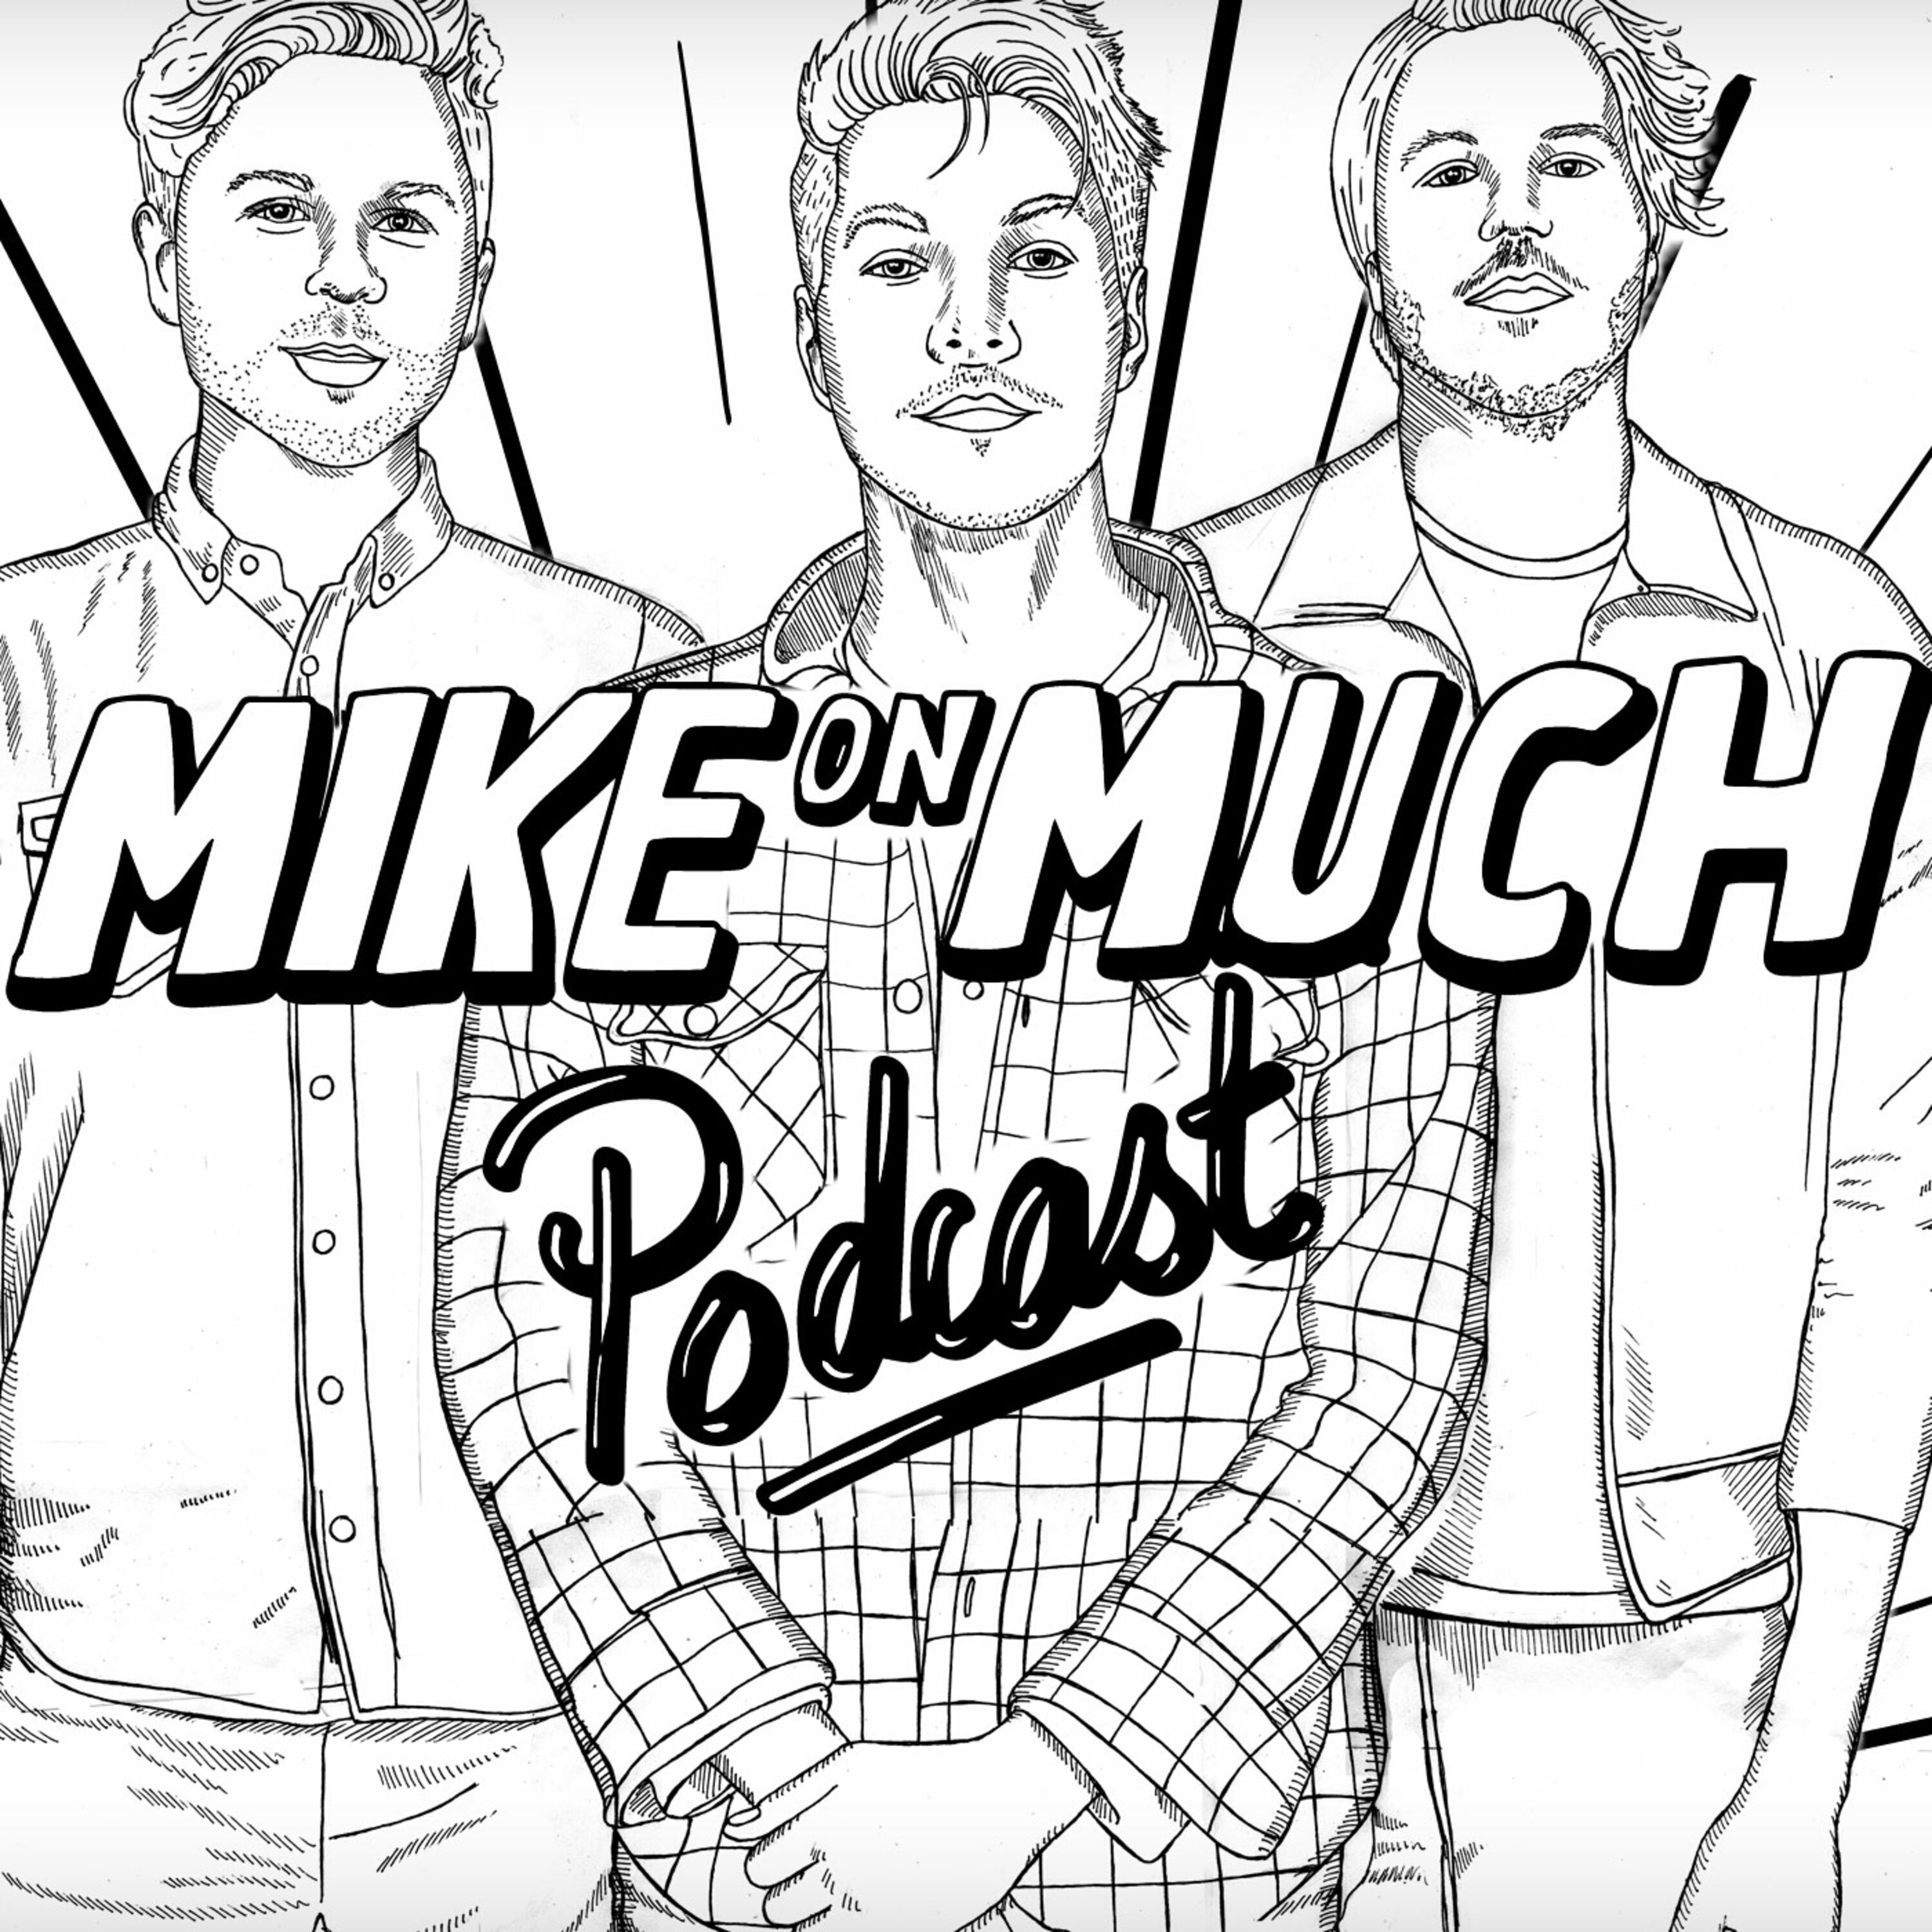 Season 1 Mike On Much: You’re Even More Broke When You Have 2 Homes